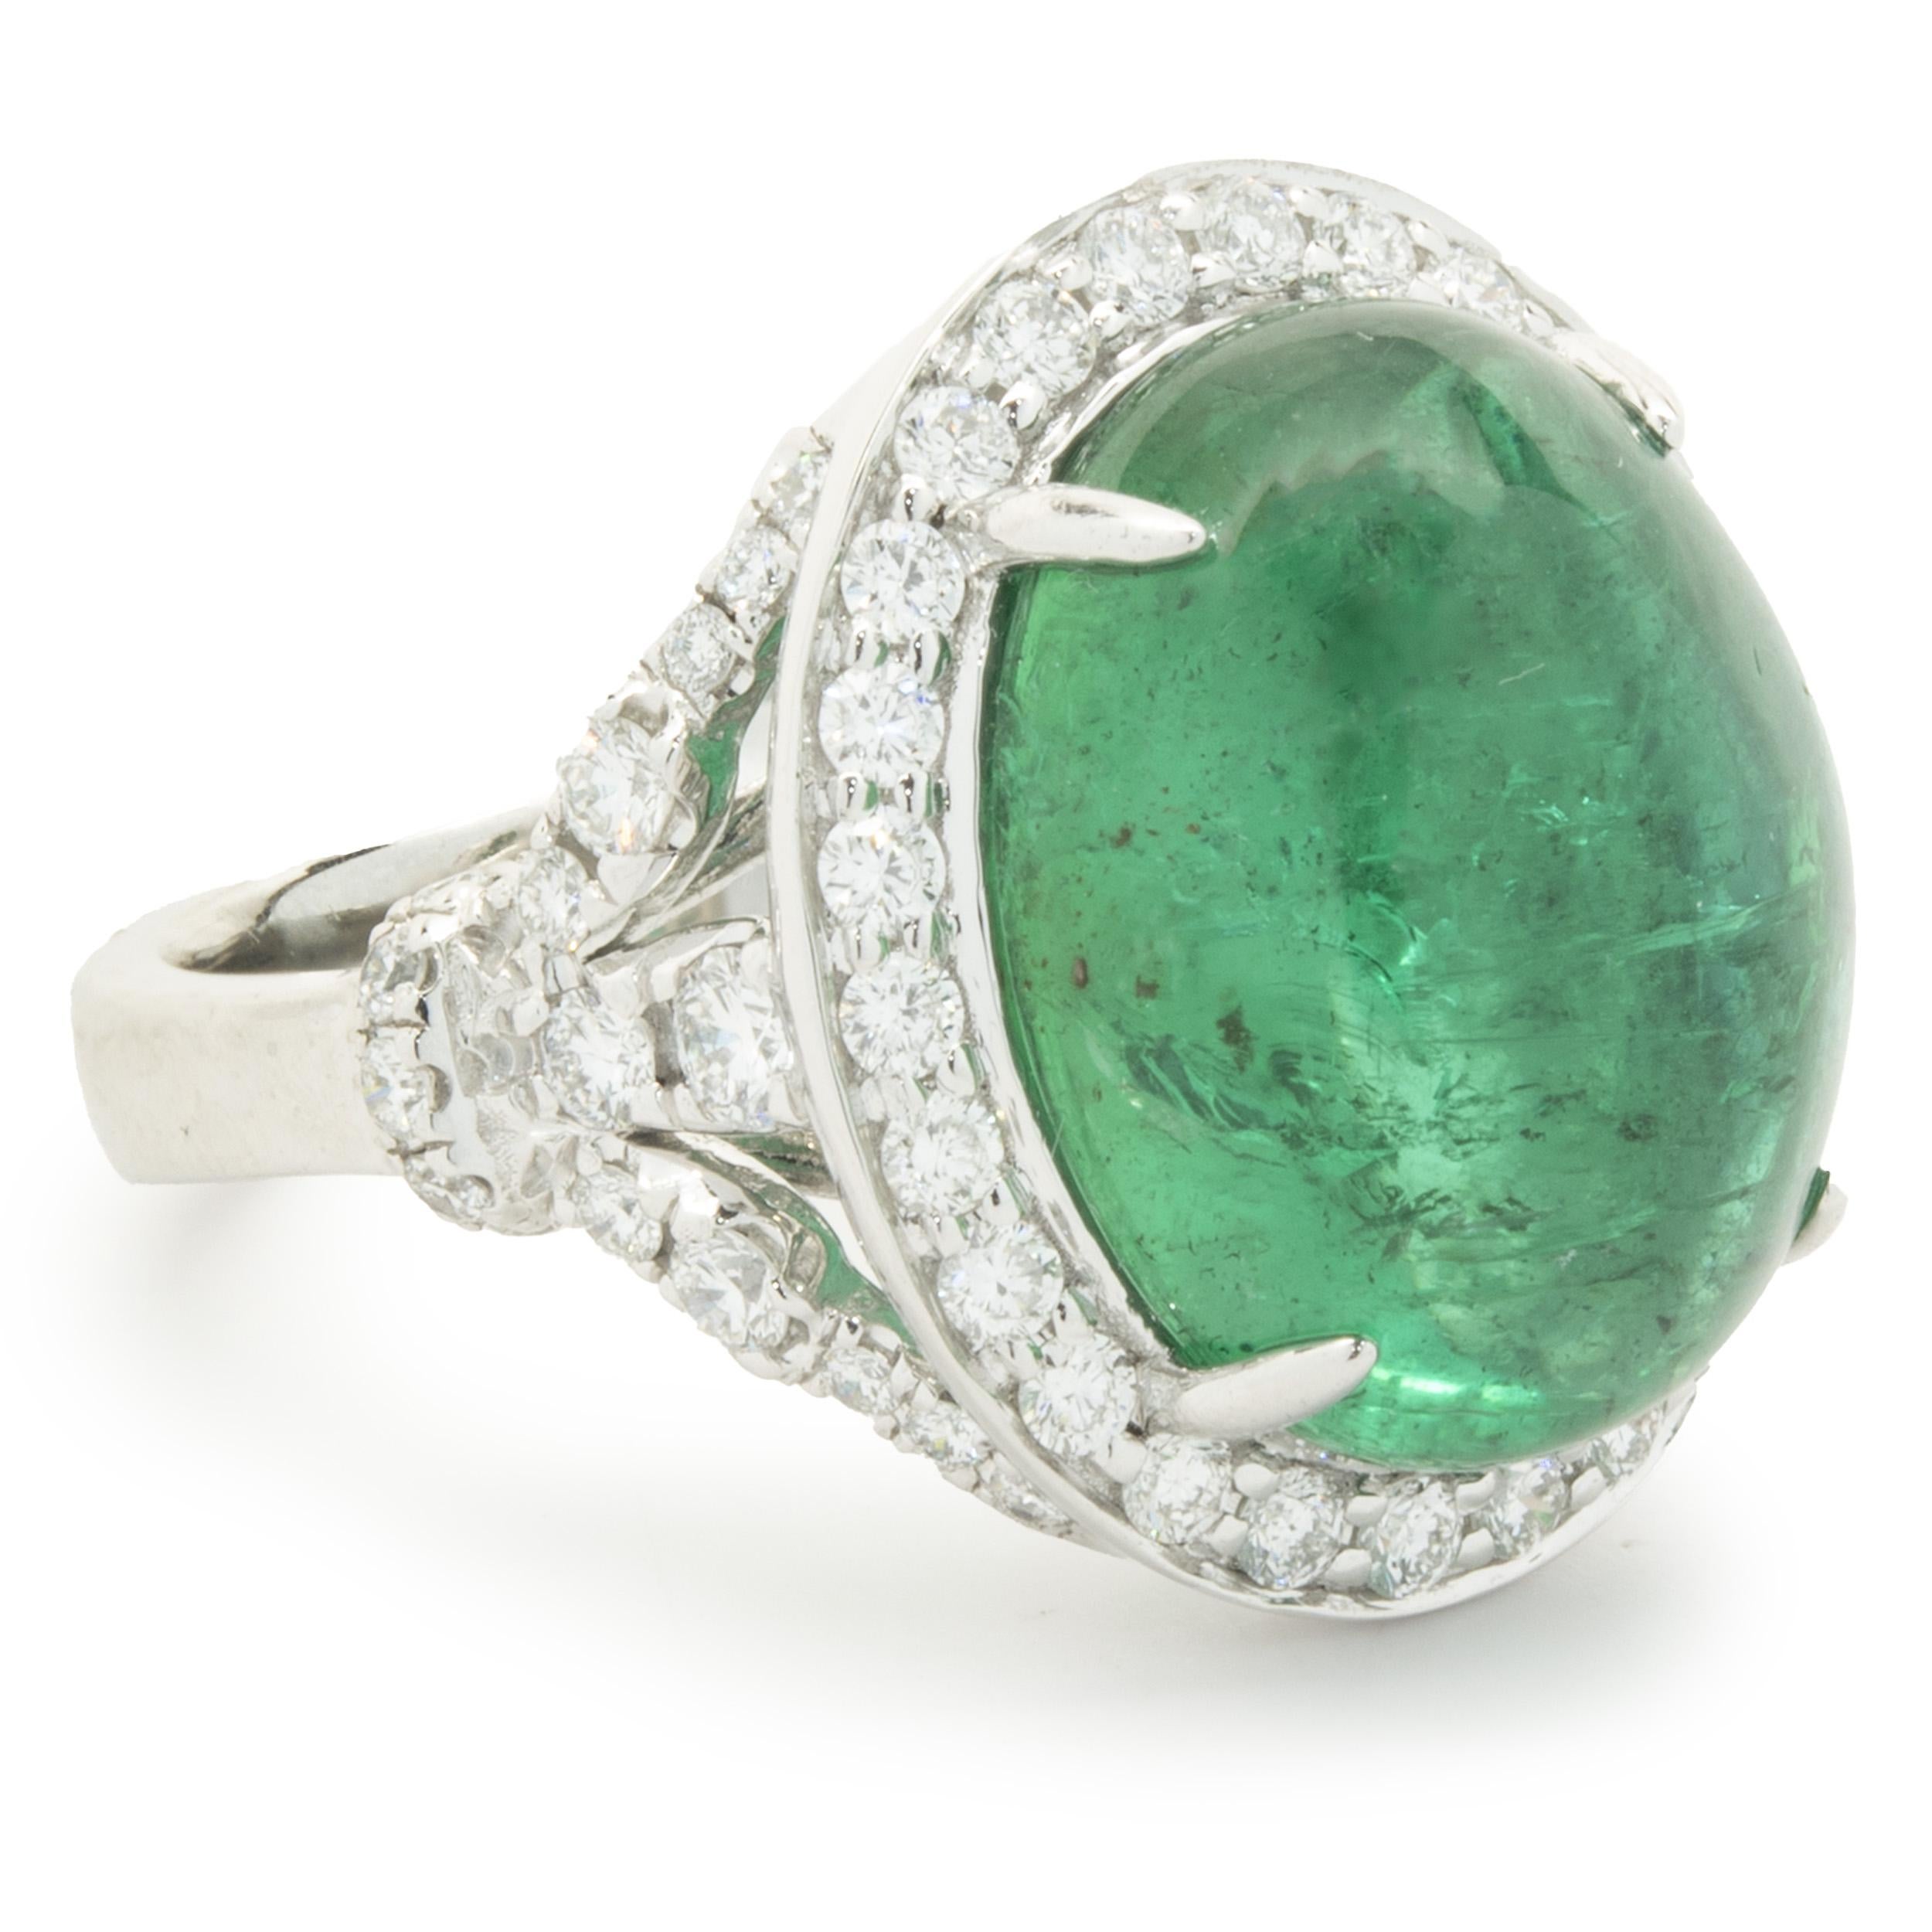 Designer: custom
Material: platinum
Emerald: 1 cabochon cut = 12.01ct
Diamond: 60 round brilliant cut = 1.19cttw
Color: F
Clarity: VS2
Ring Size: 6.5 (complimentary sizing available)
Weight: 13.28 grams